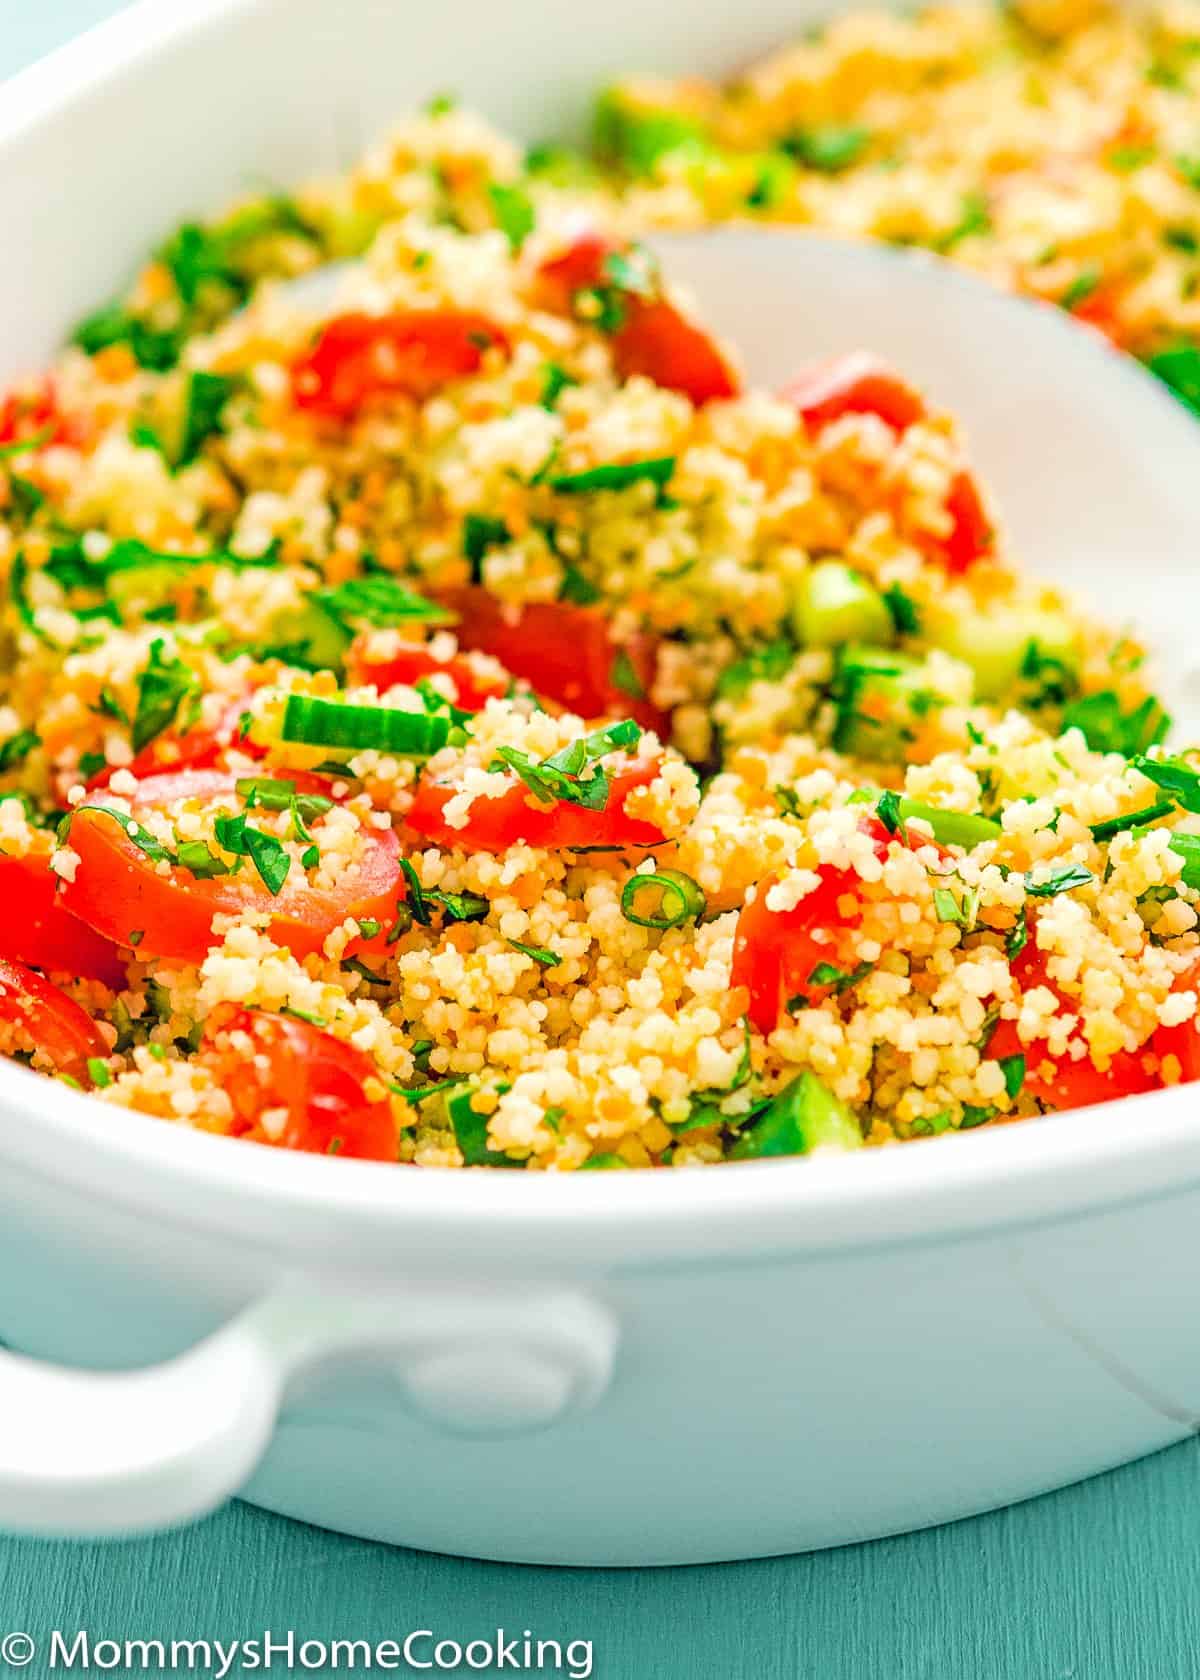 couscous, cucumbers, tomatoes, mint, and parsley salad in a bowl with a serving spoon